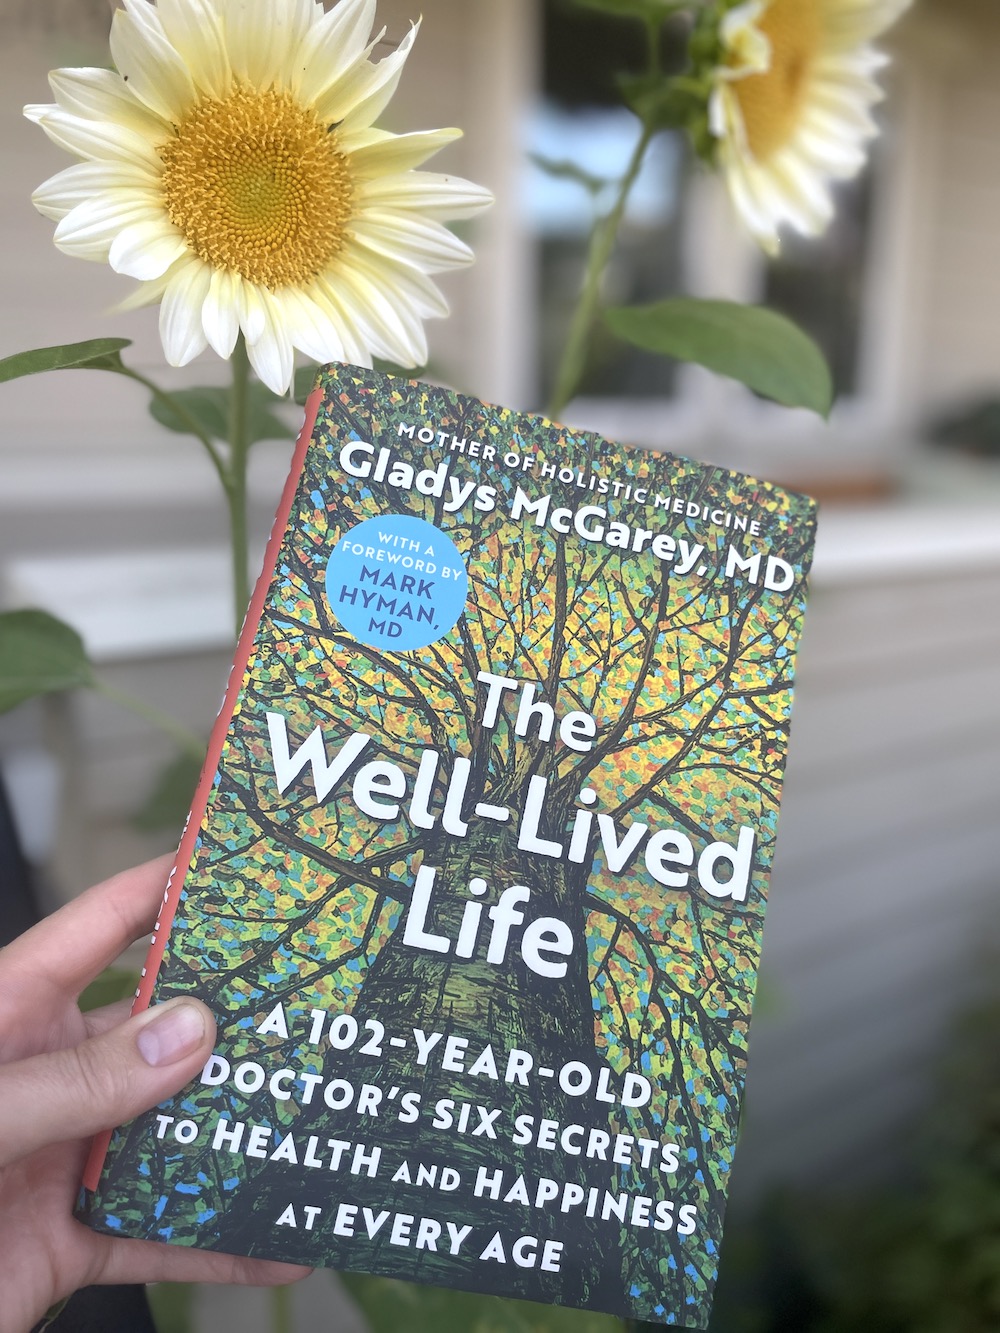 362: The Fundamental Ingredient in a Well-Lived (and long) Life: Honor What Makes Your Heart Sing, 13 life lessons from Dr. Gladys McGarey